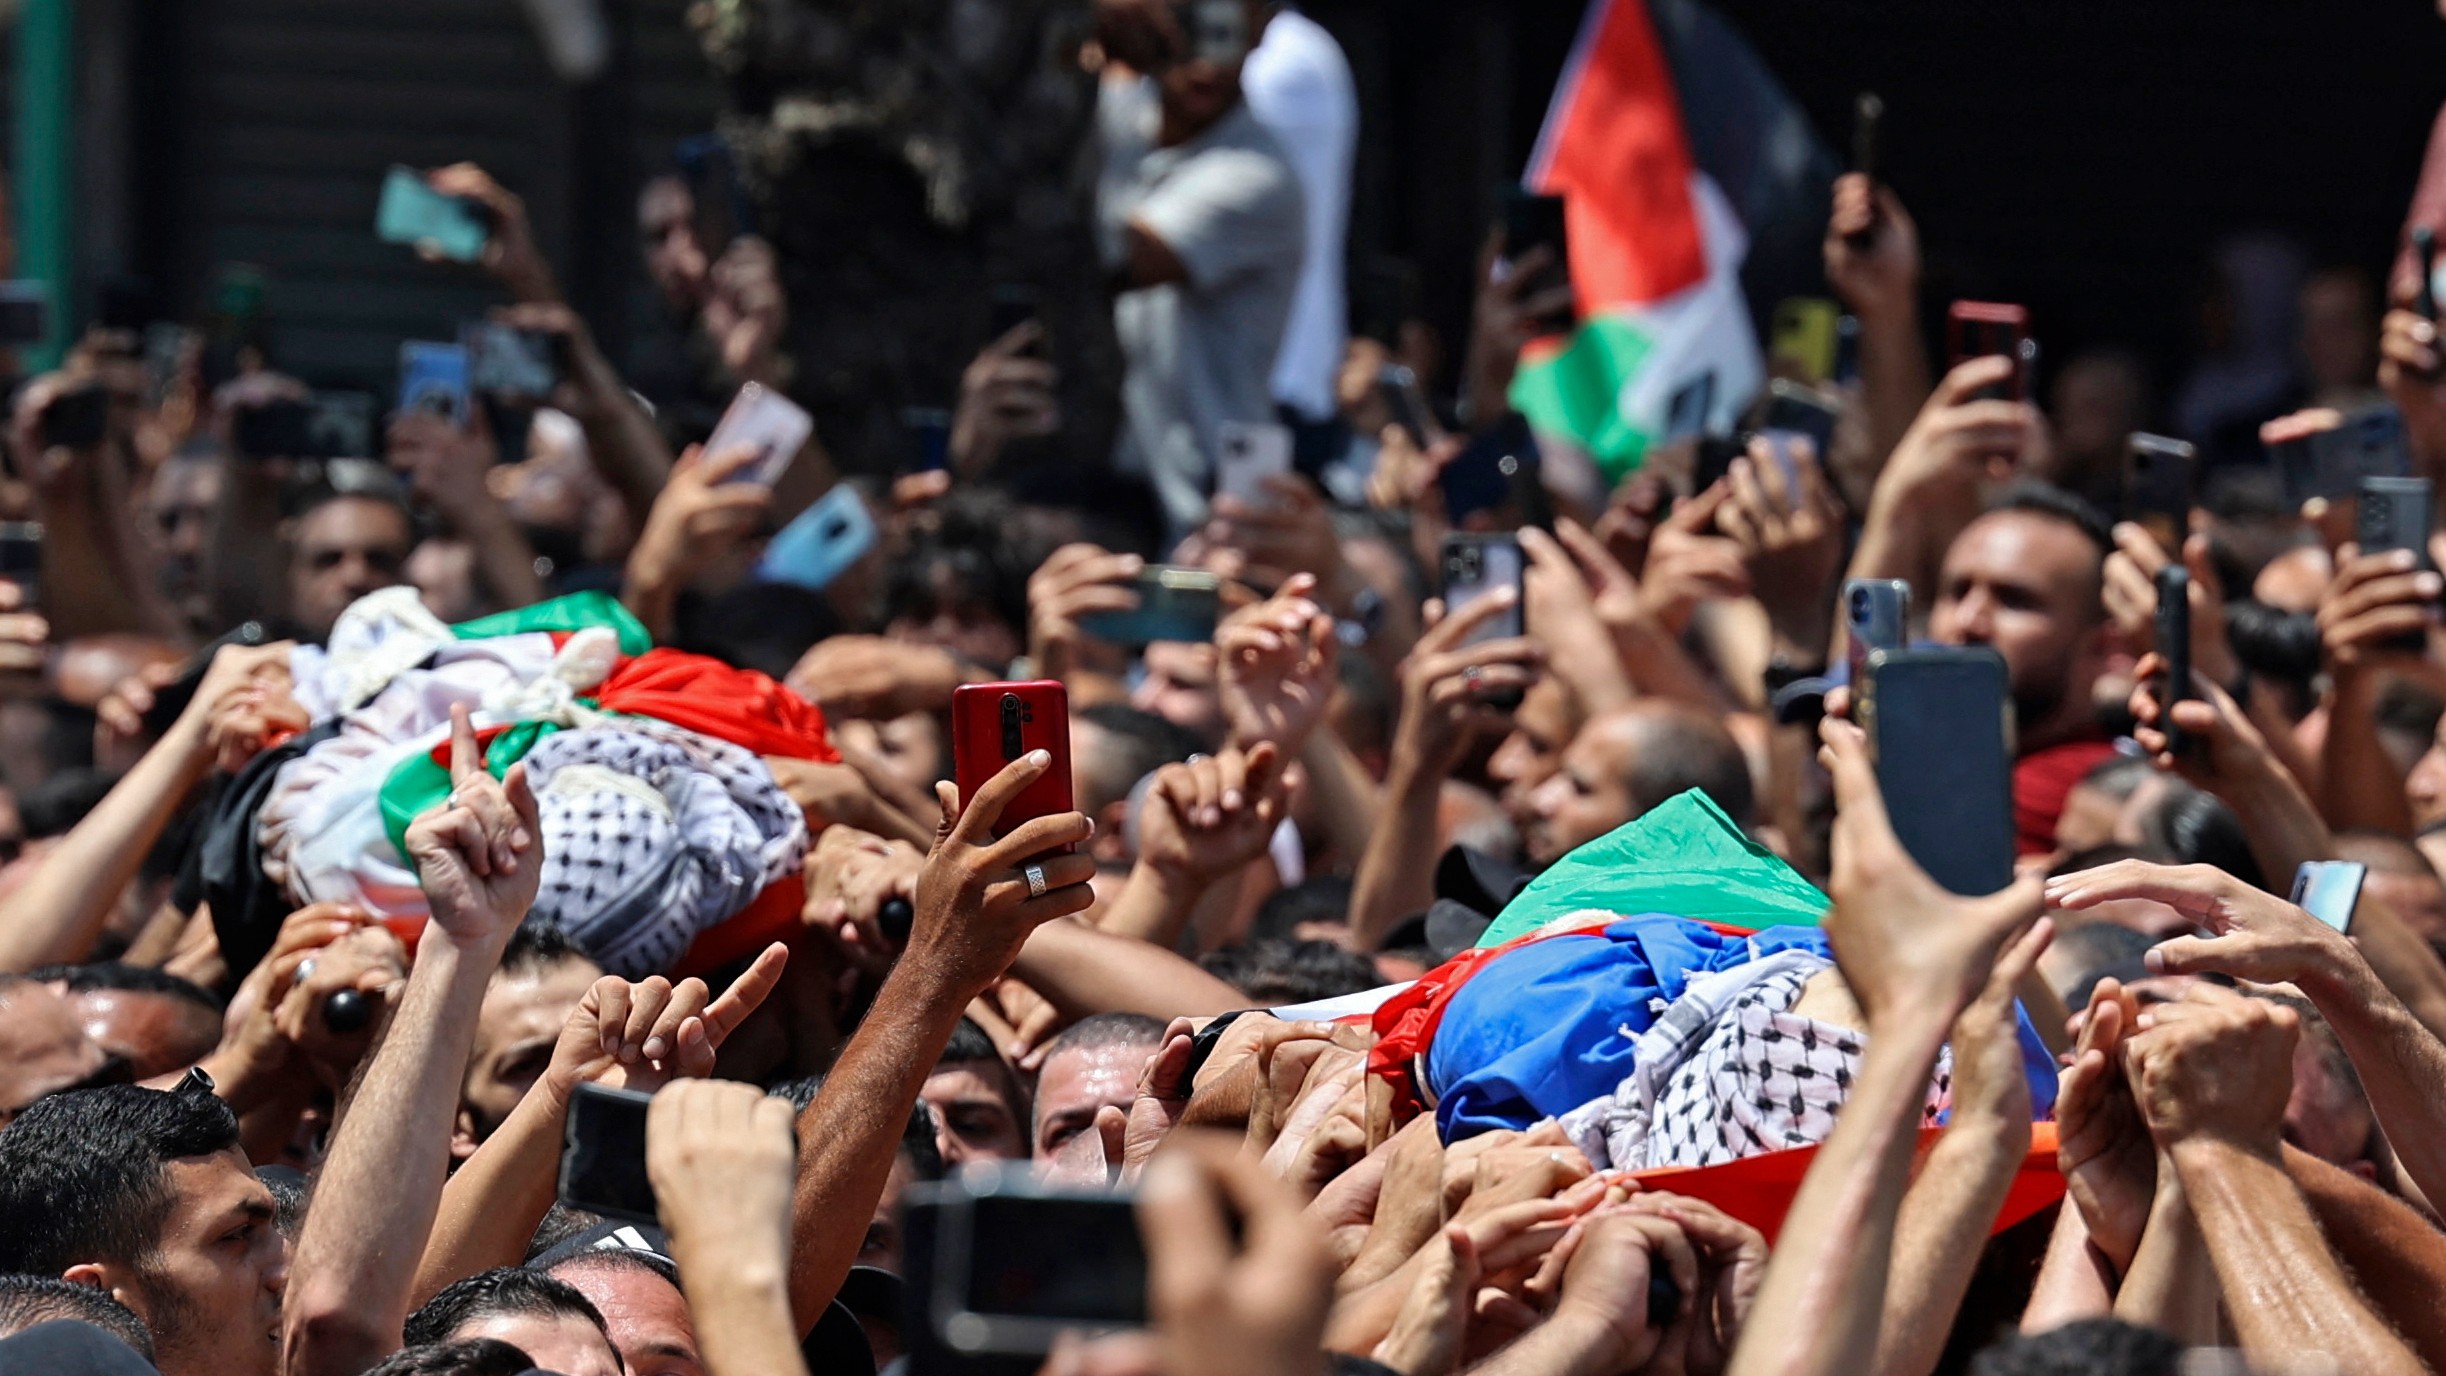 Mourners carry the bodies of Palestinian militants of the Al-Aqsa Martyrs' Brigade Hussein Taha and Islam Sabbouh, who were killed in an Israeli raid, during a funeral procession in the West Bank city of Nablus on August 9, 2022.